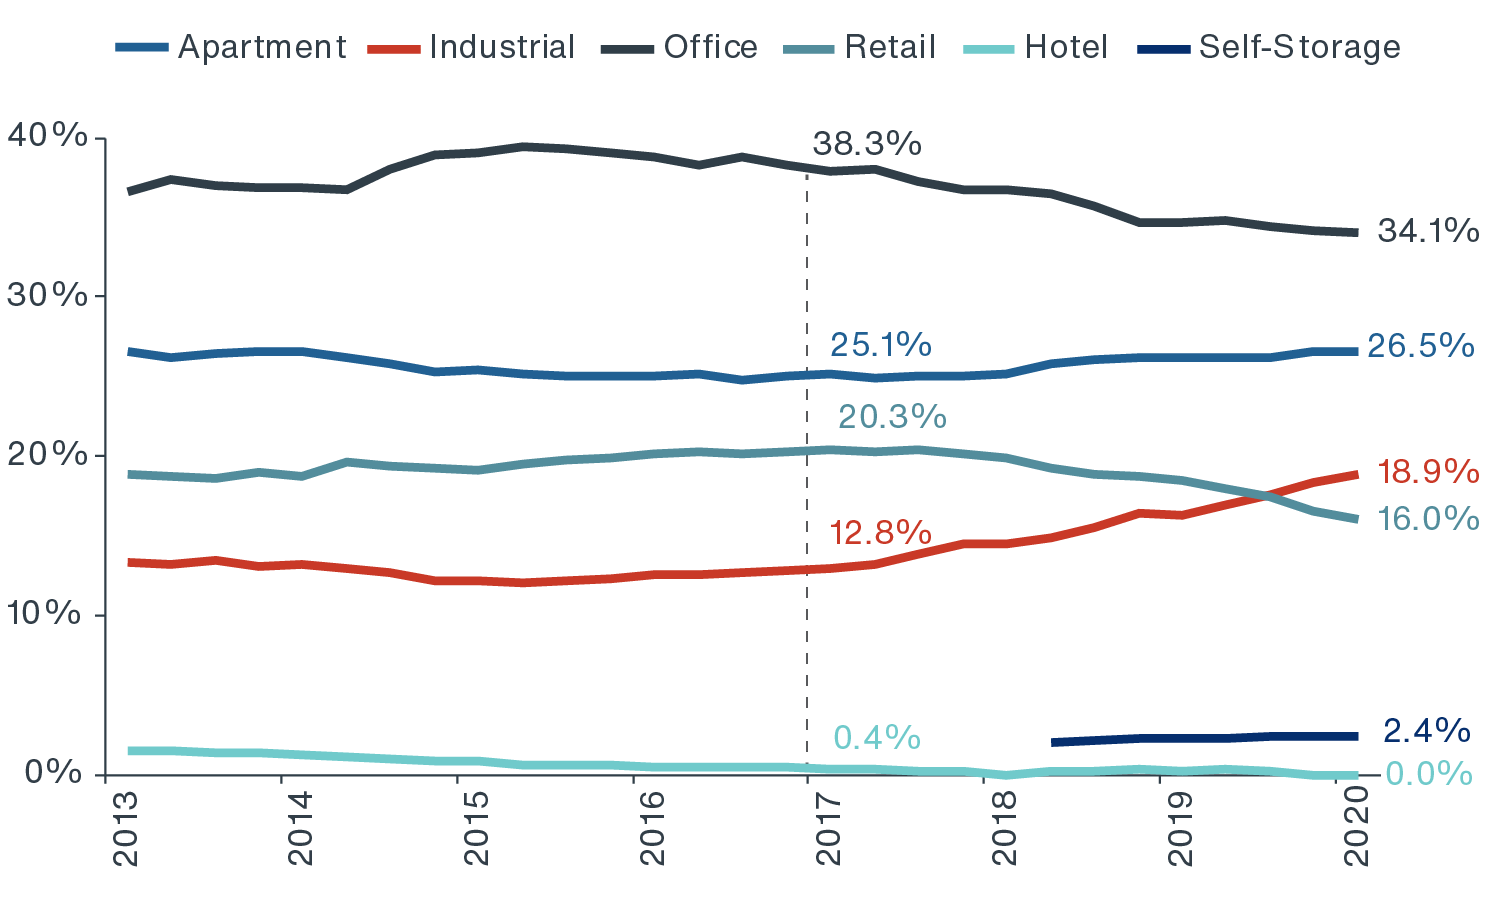 Line chart depicting ODCE sector decline in Office and increase in Industrial